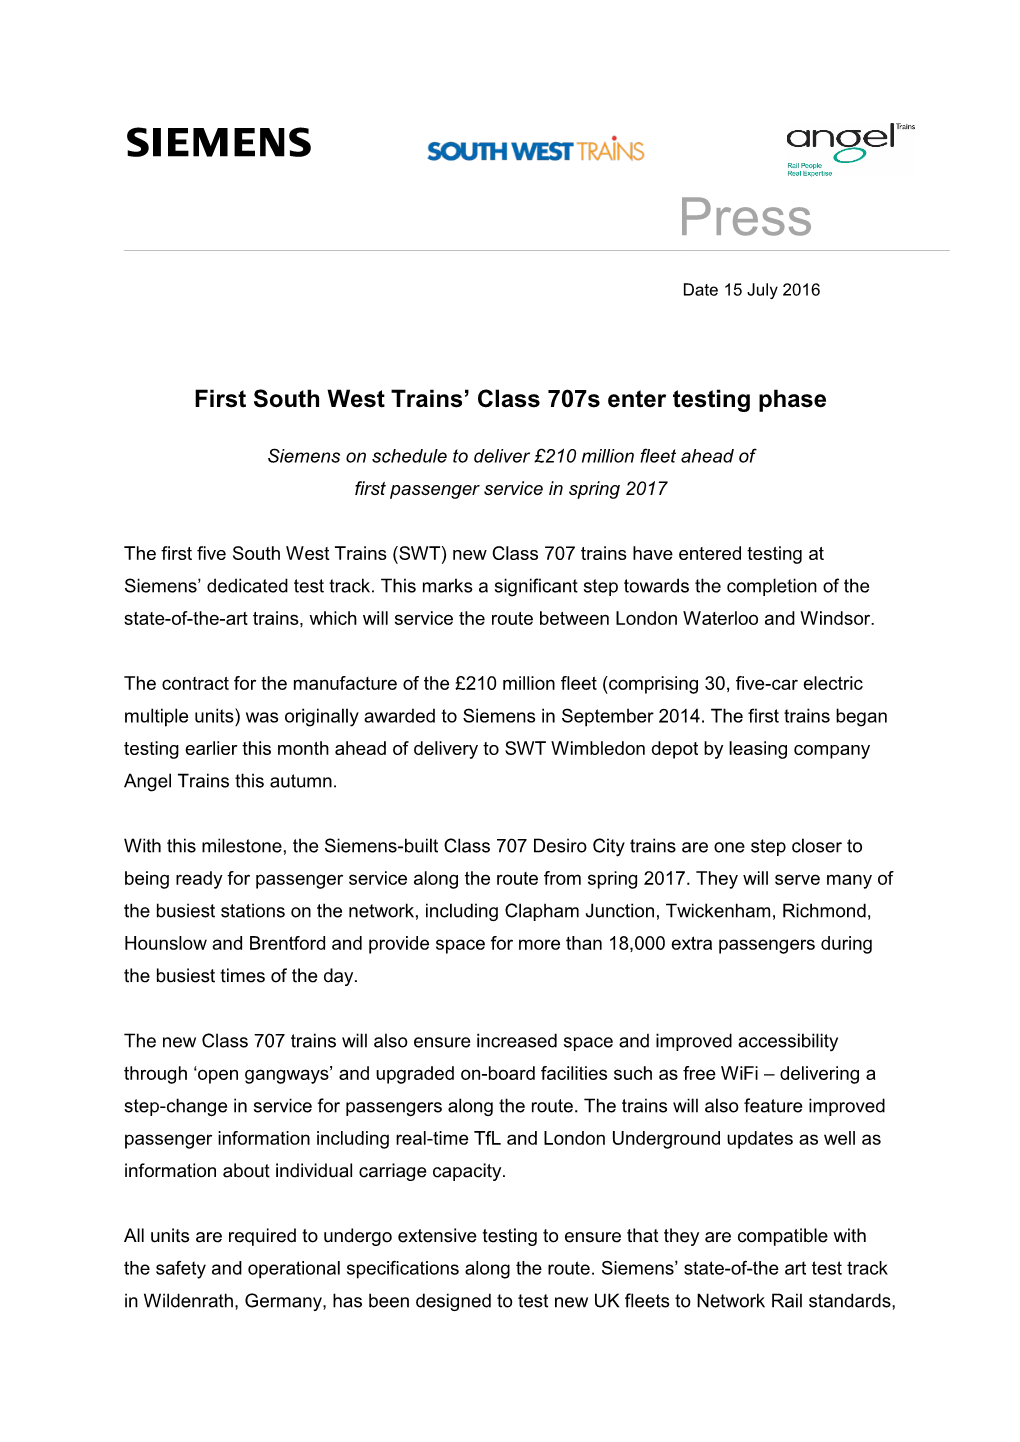 First South West Trains' Class 707S Enter Testing Phase